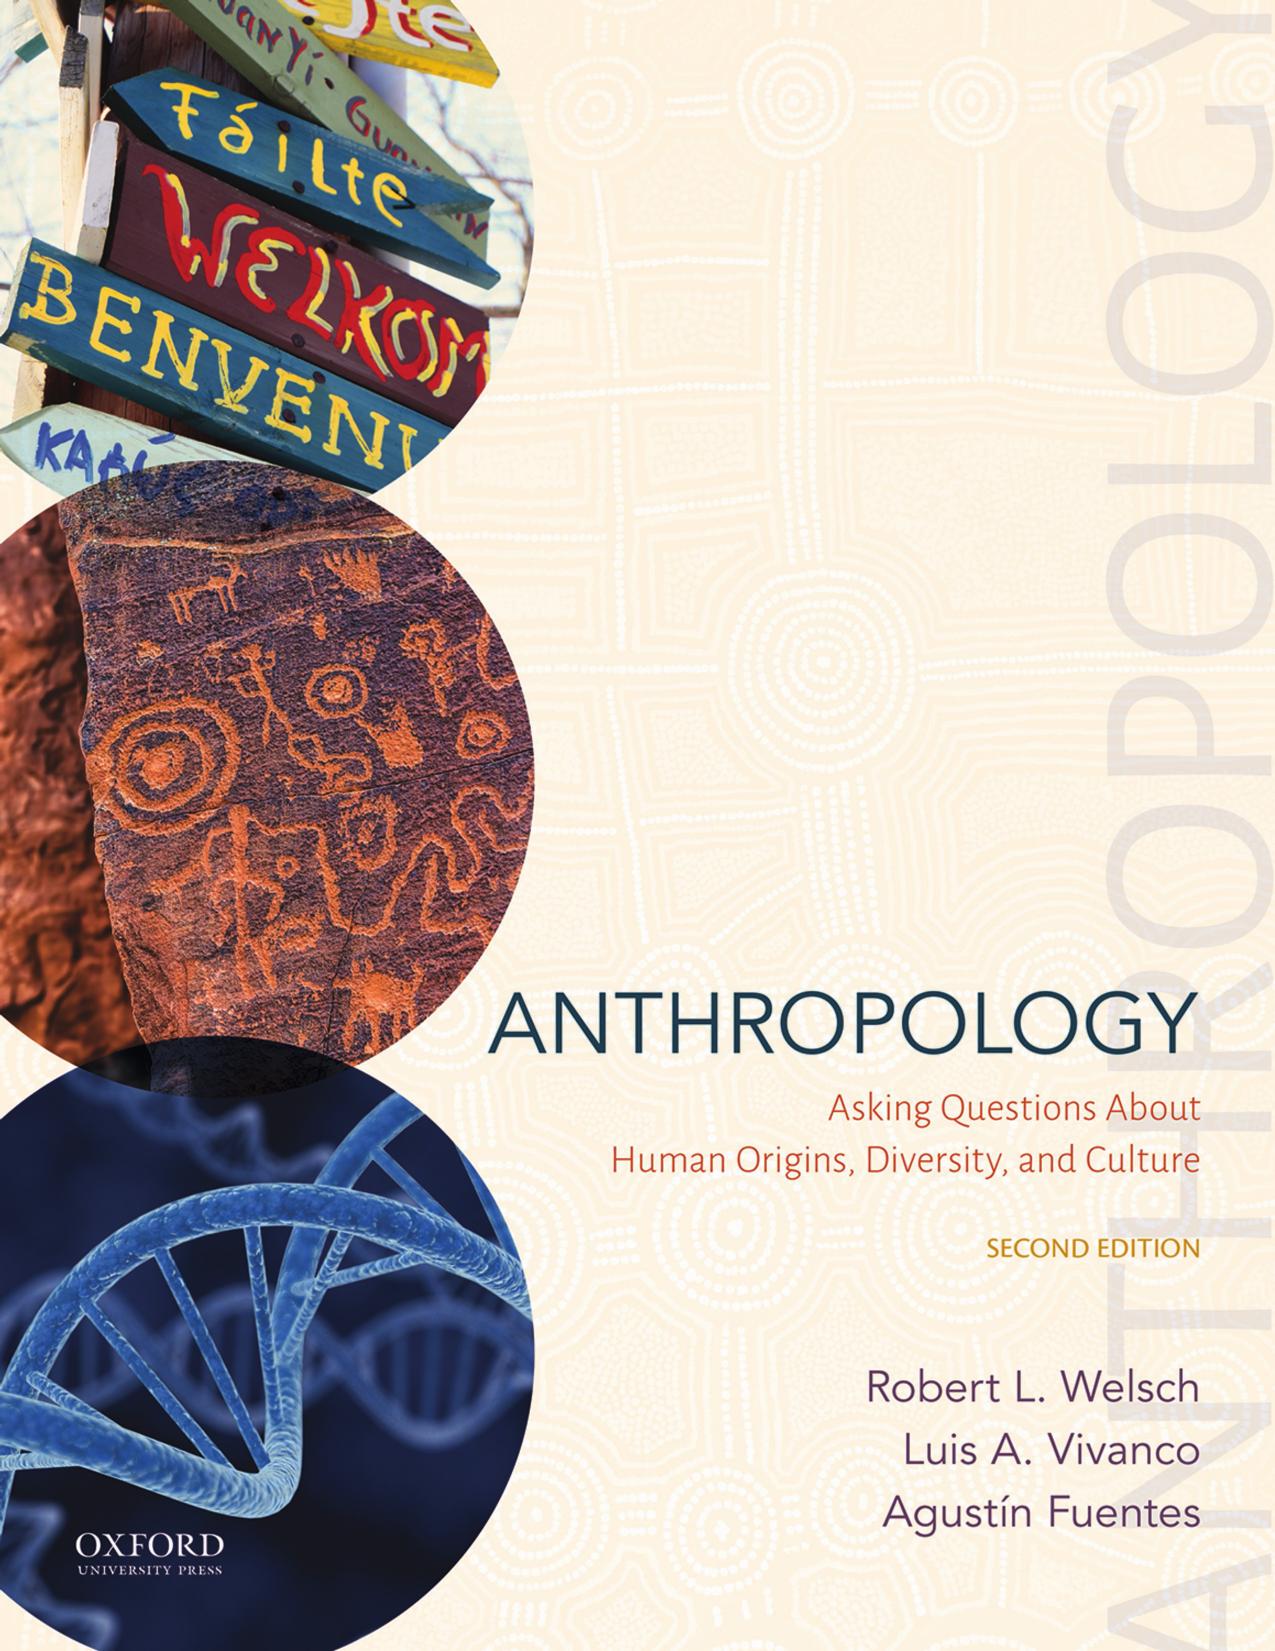 (eBook PDF)Anthropology: Asking Questions About Human Origins, Diversity, and Culture 2nd Edition by Robert L. Welsch,Luis A. Vivanco